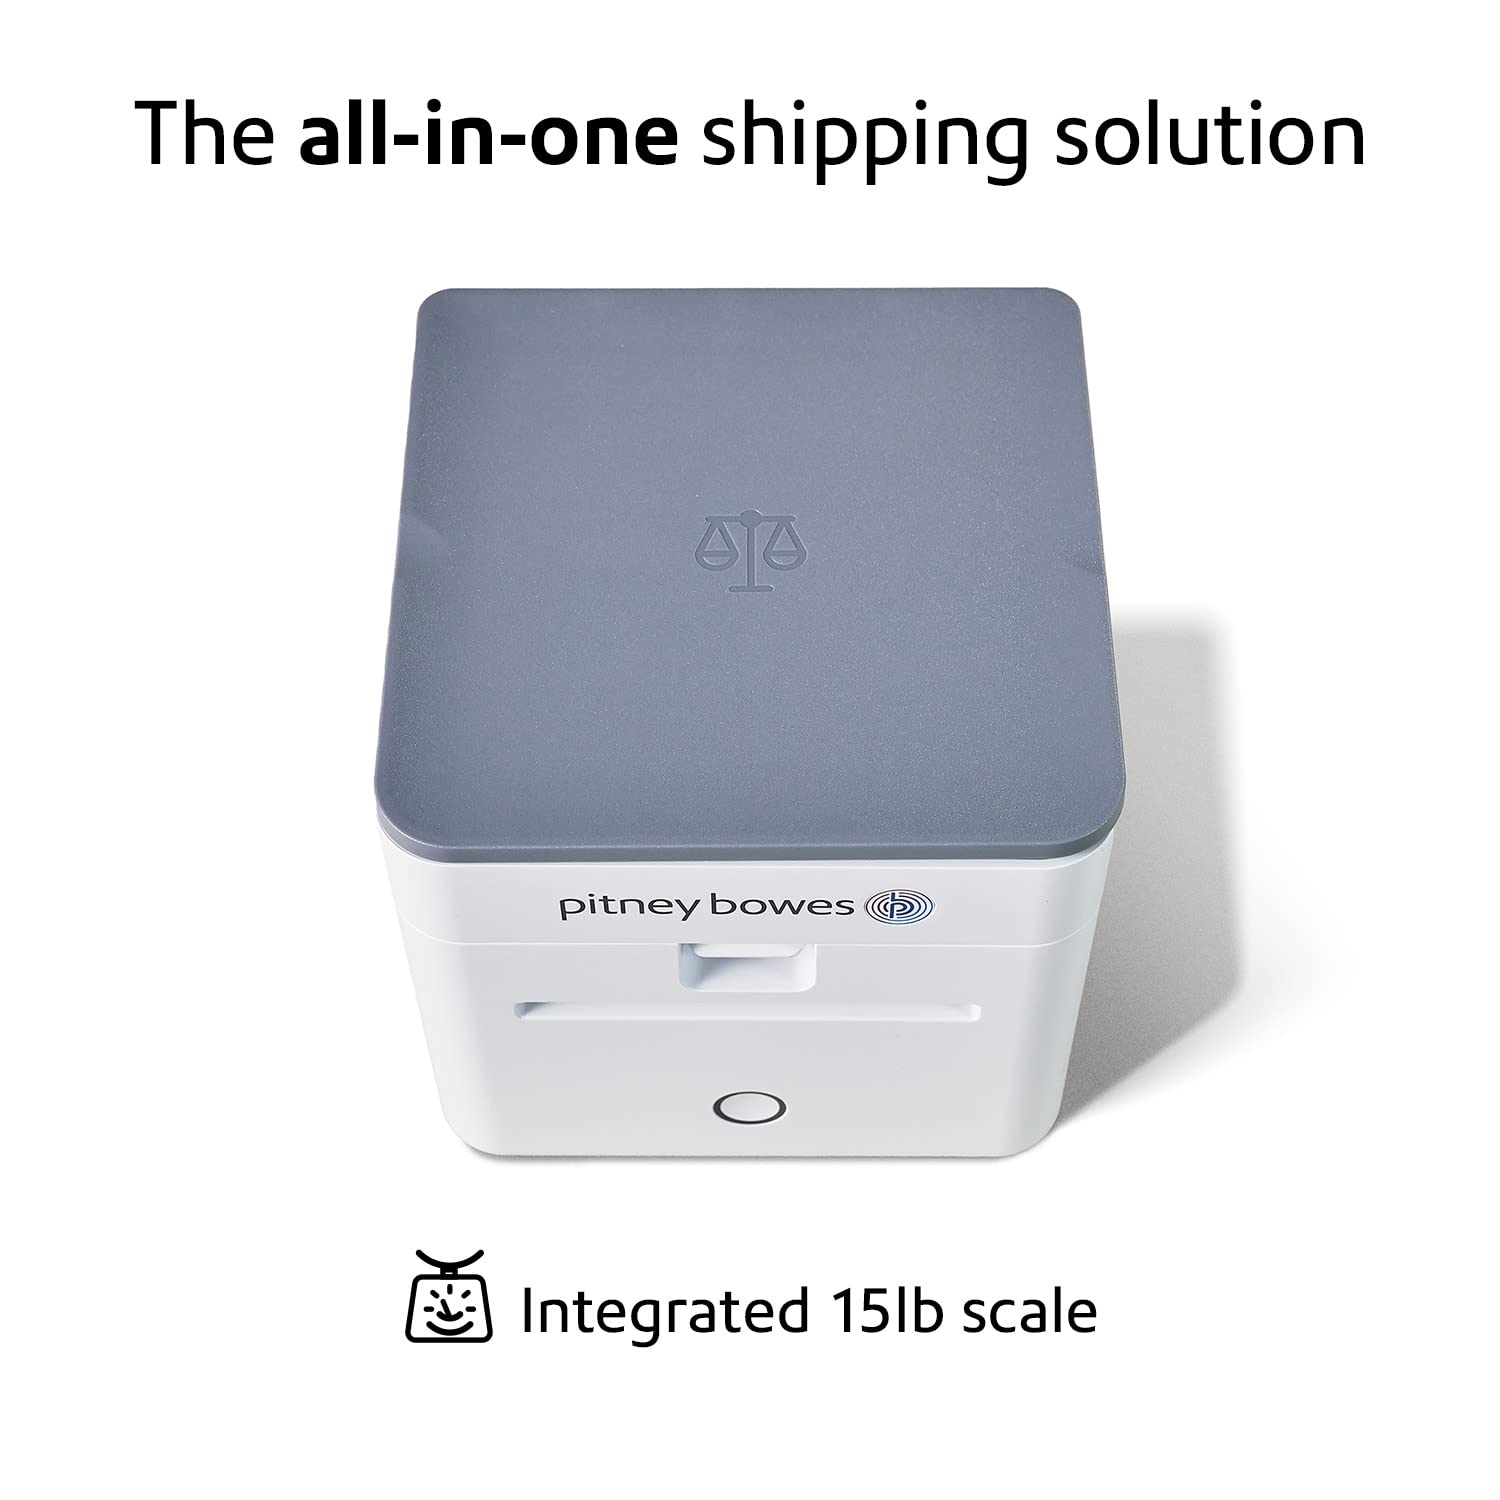 Pitney Bowes Shipping Label Printer with Built-in Scale, all-in-one shipping solution from, on shipping with PitneyShip™ Cube and software application